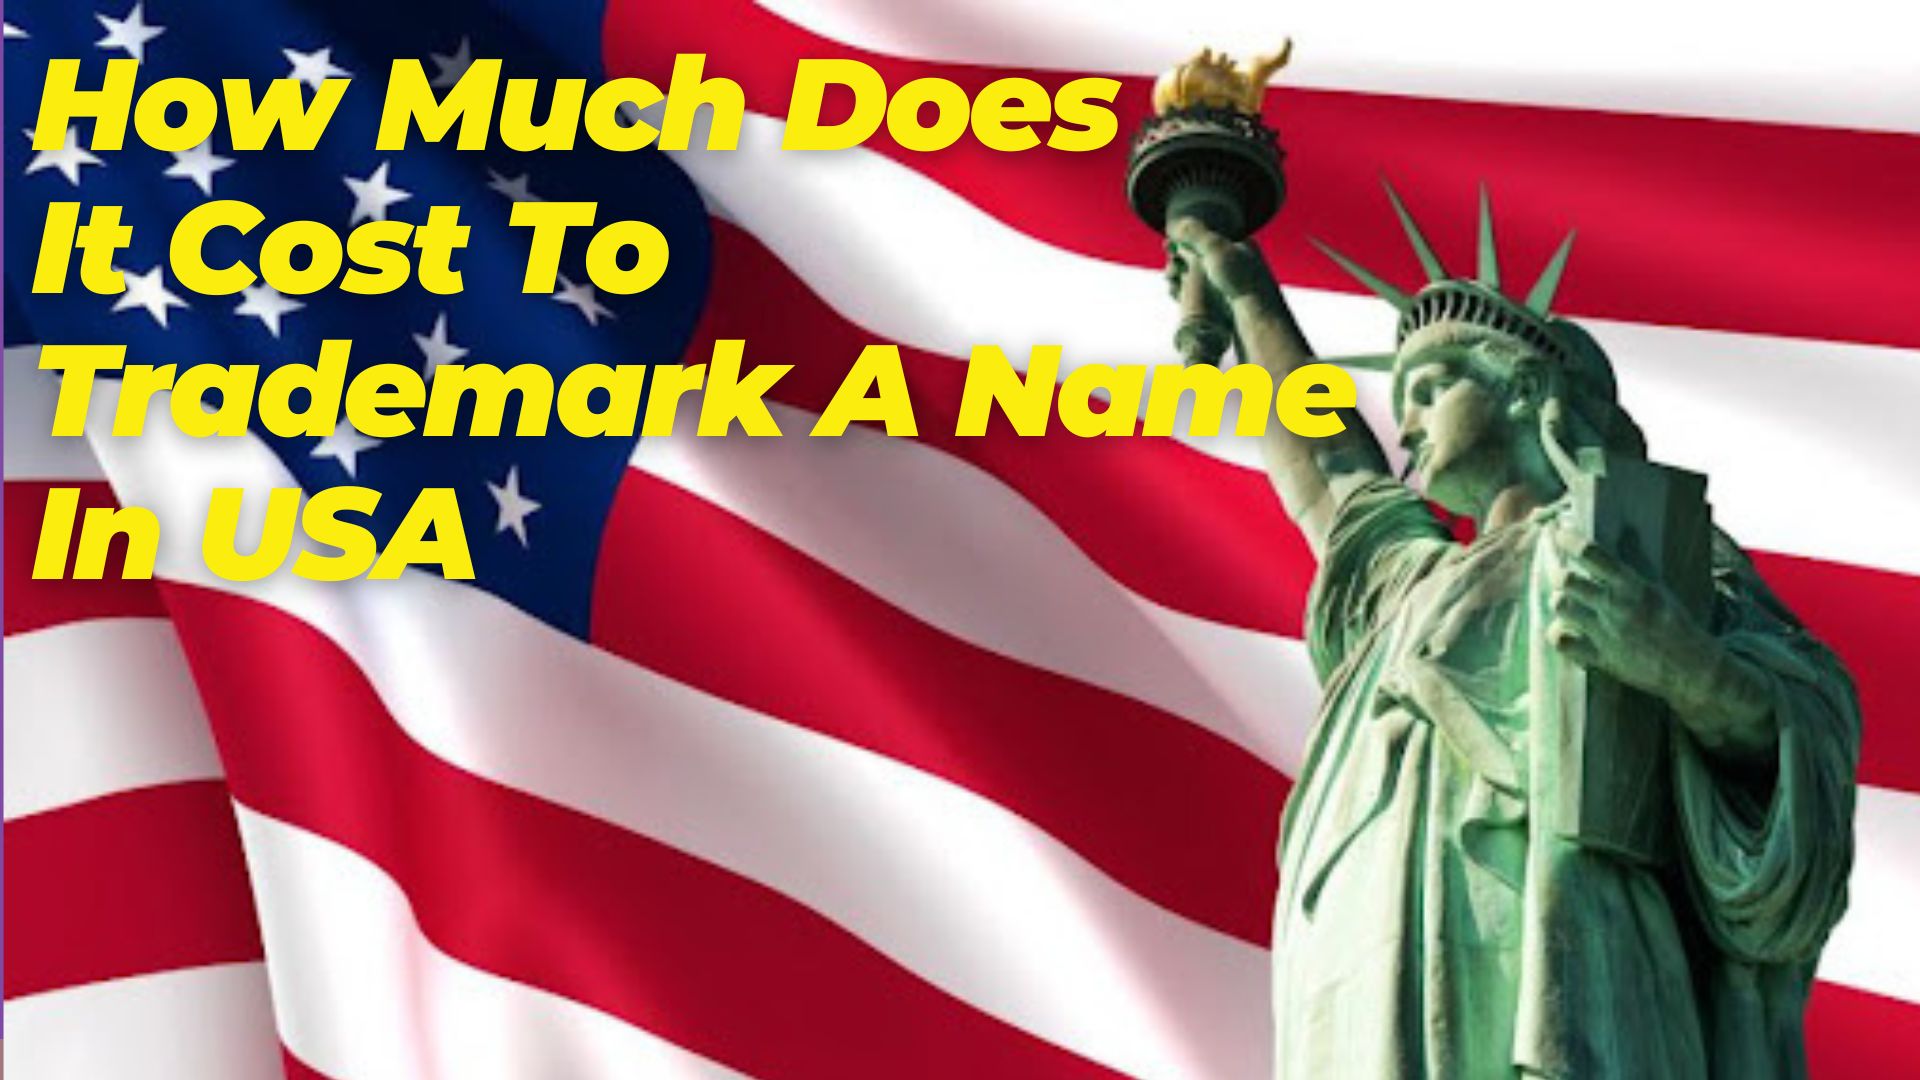 How Much Does It Cost To Trademark A Name In USA